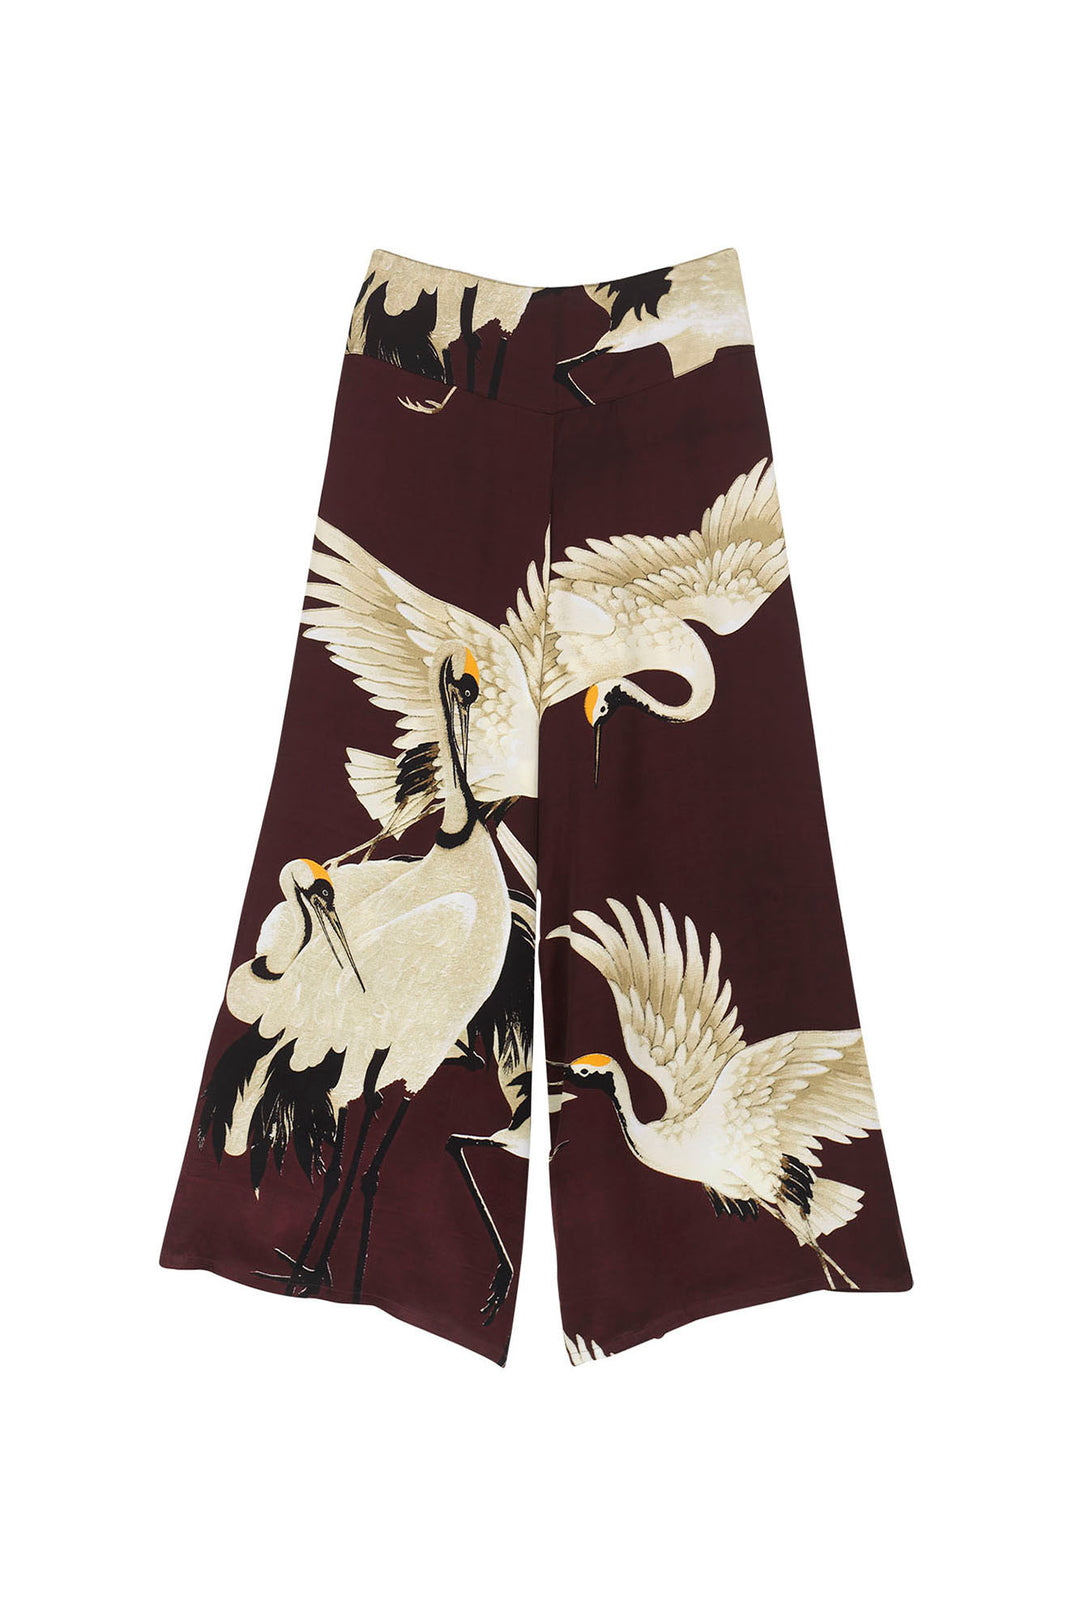 ladies palazzo pants  burgundy background with stork bird print by One Hundred Stars